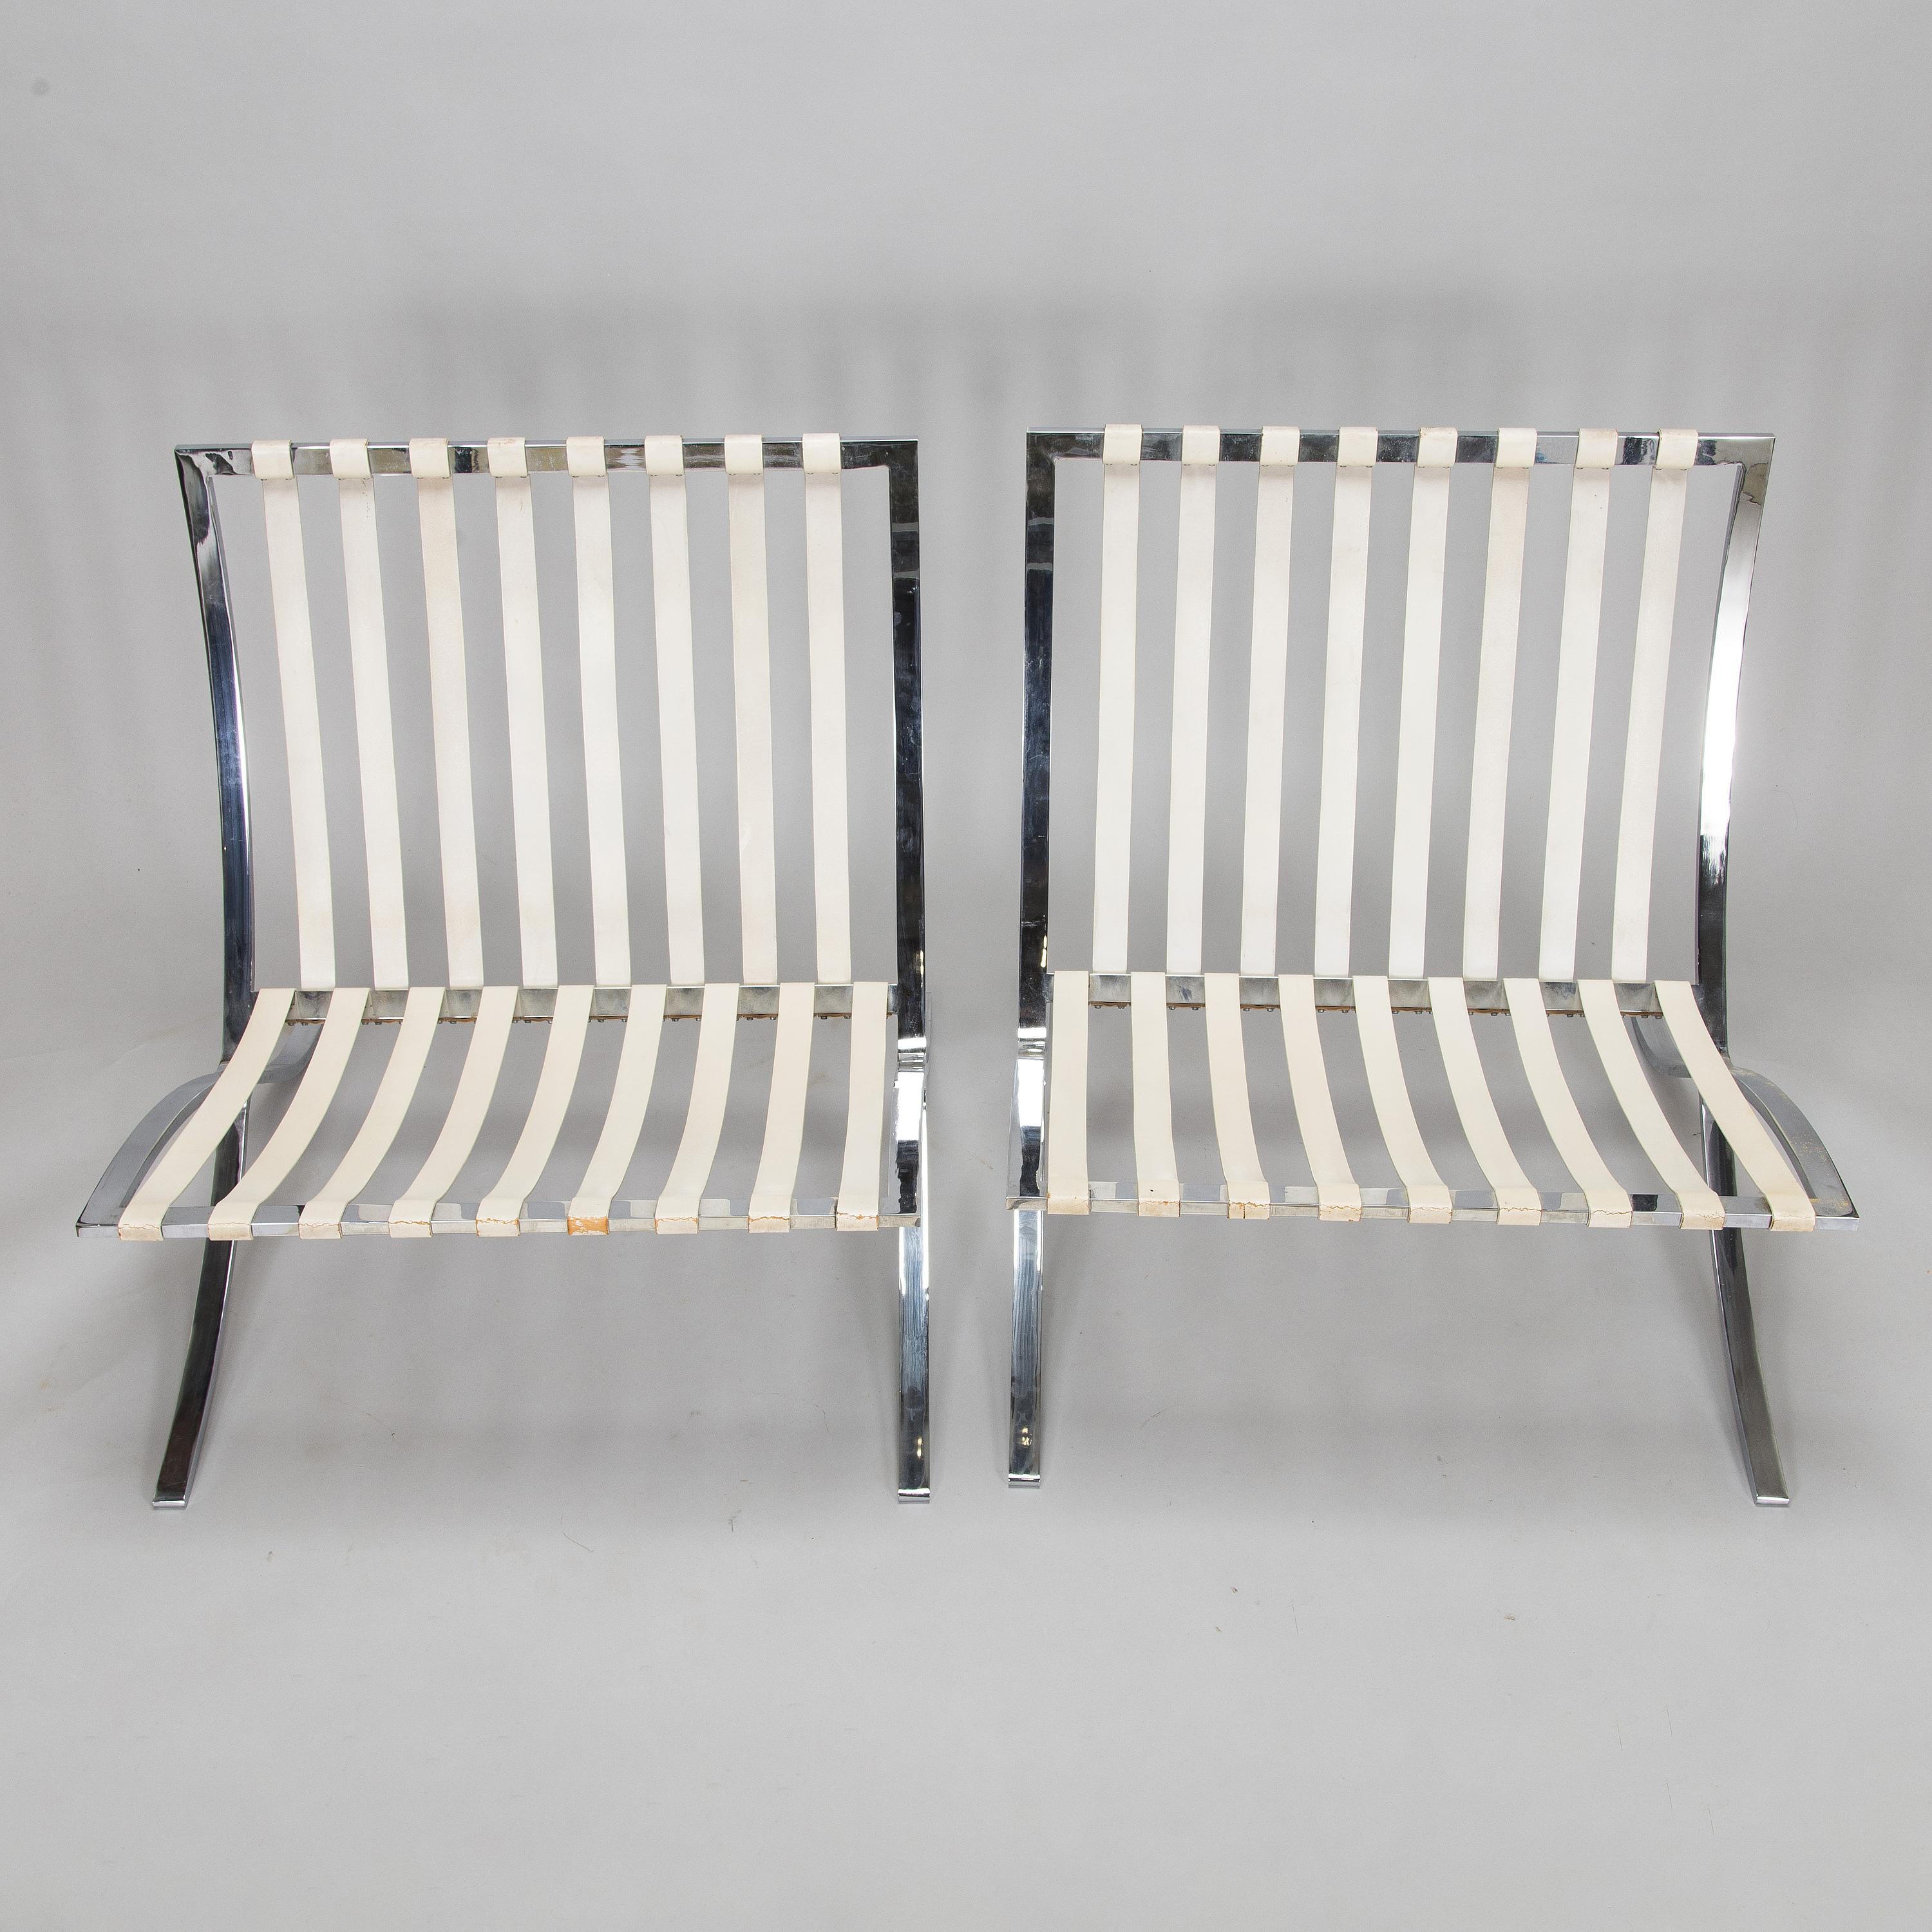 Ludwig Mies van der Rohe 'Barcelona' chair for Knoll made in USA 1965 For Sale 1